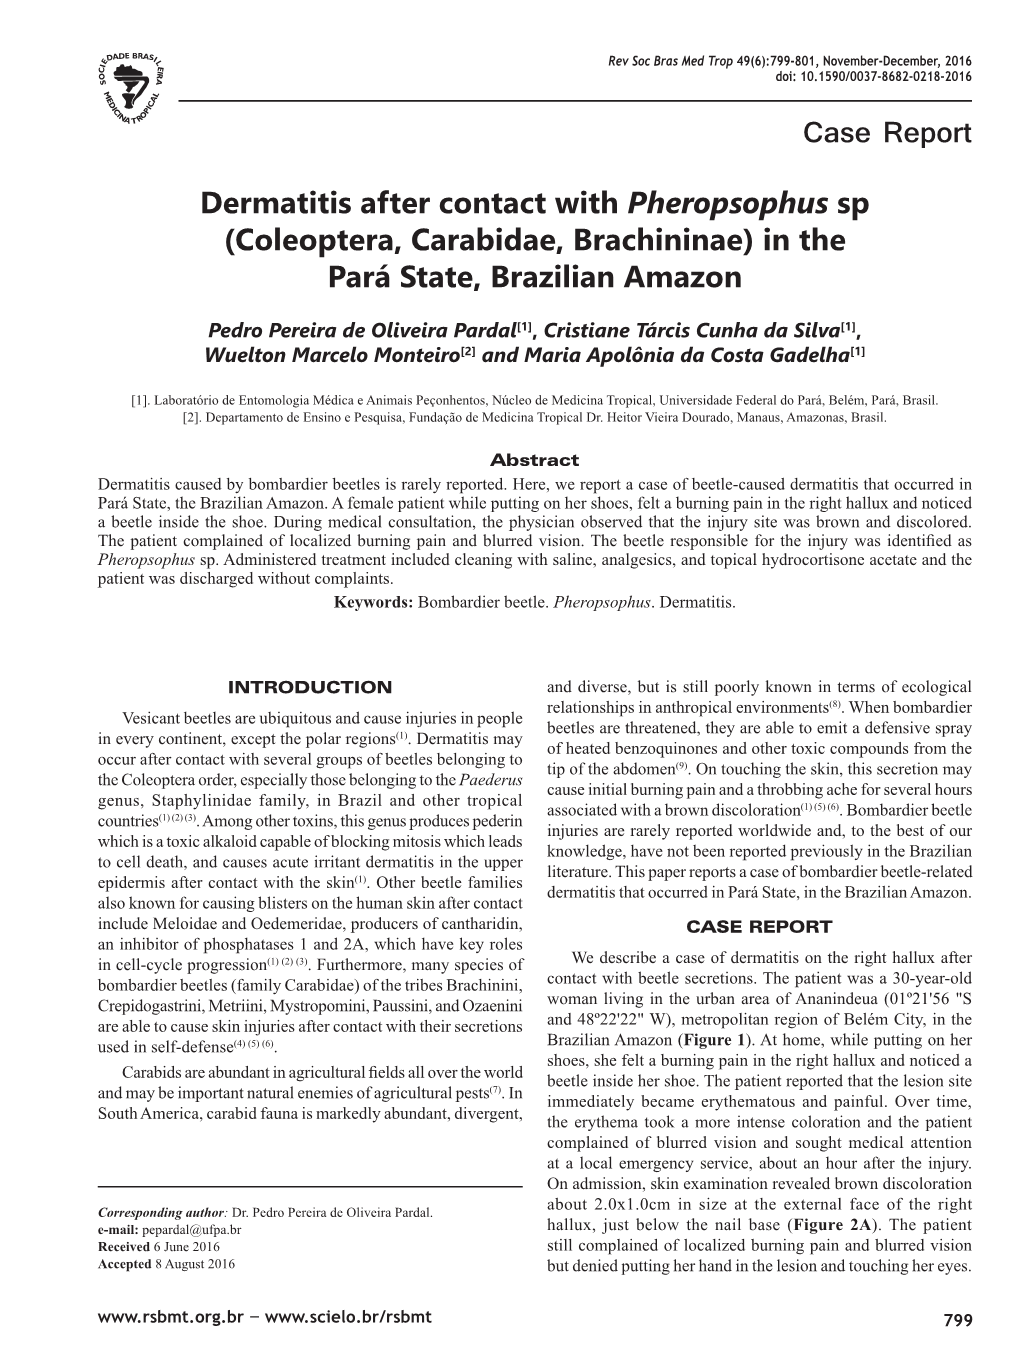 Case Report Dermatitis After Contact with Pheropsophus Sp (Coleoptera